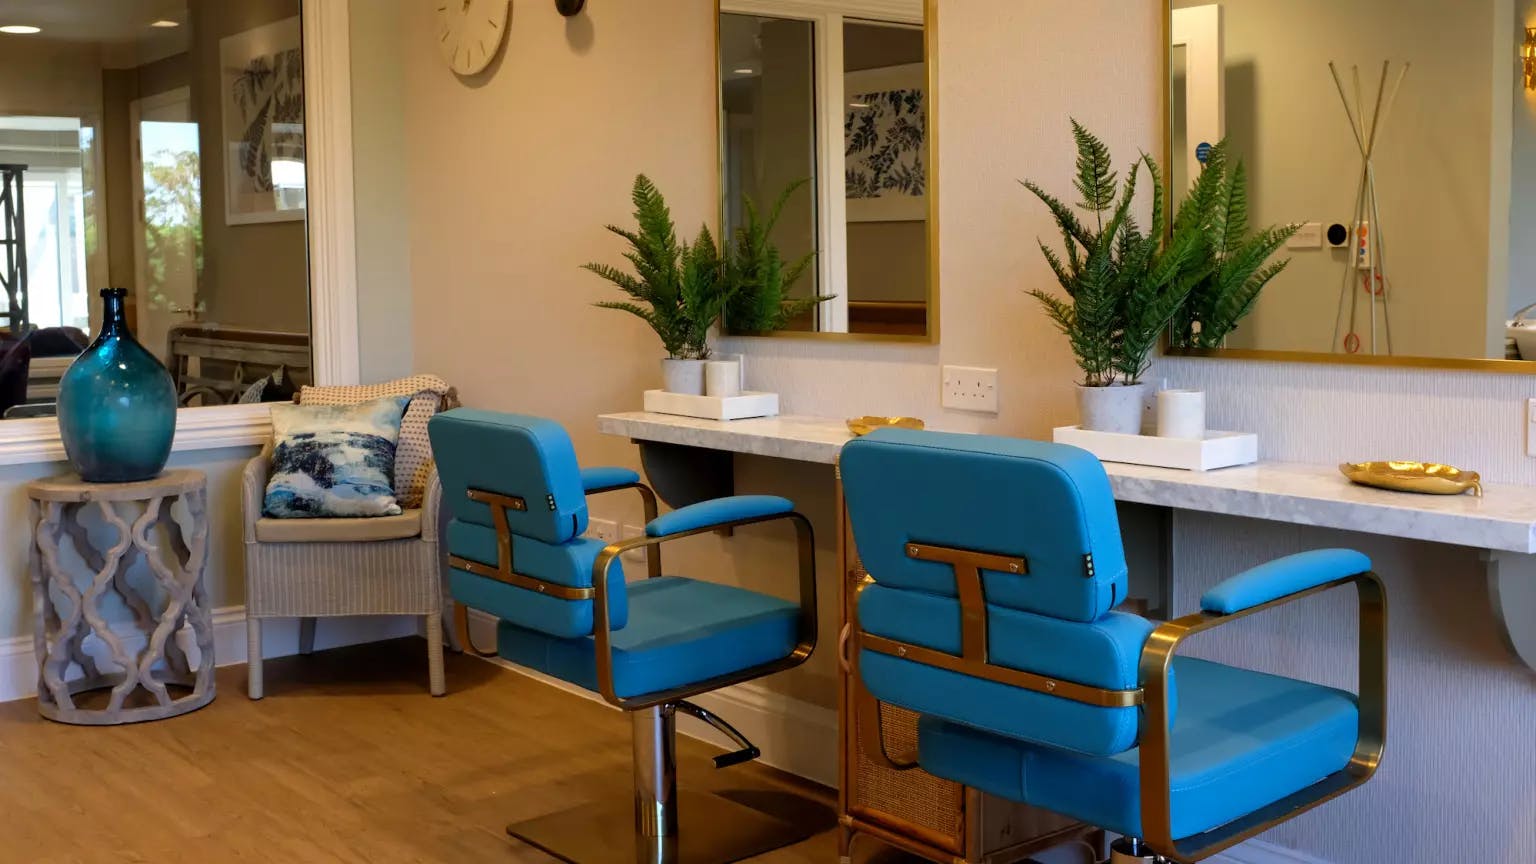 Salon of Mantels Court care home in Biggleswade, Bedfordshire